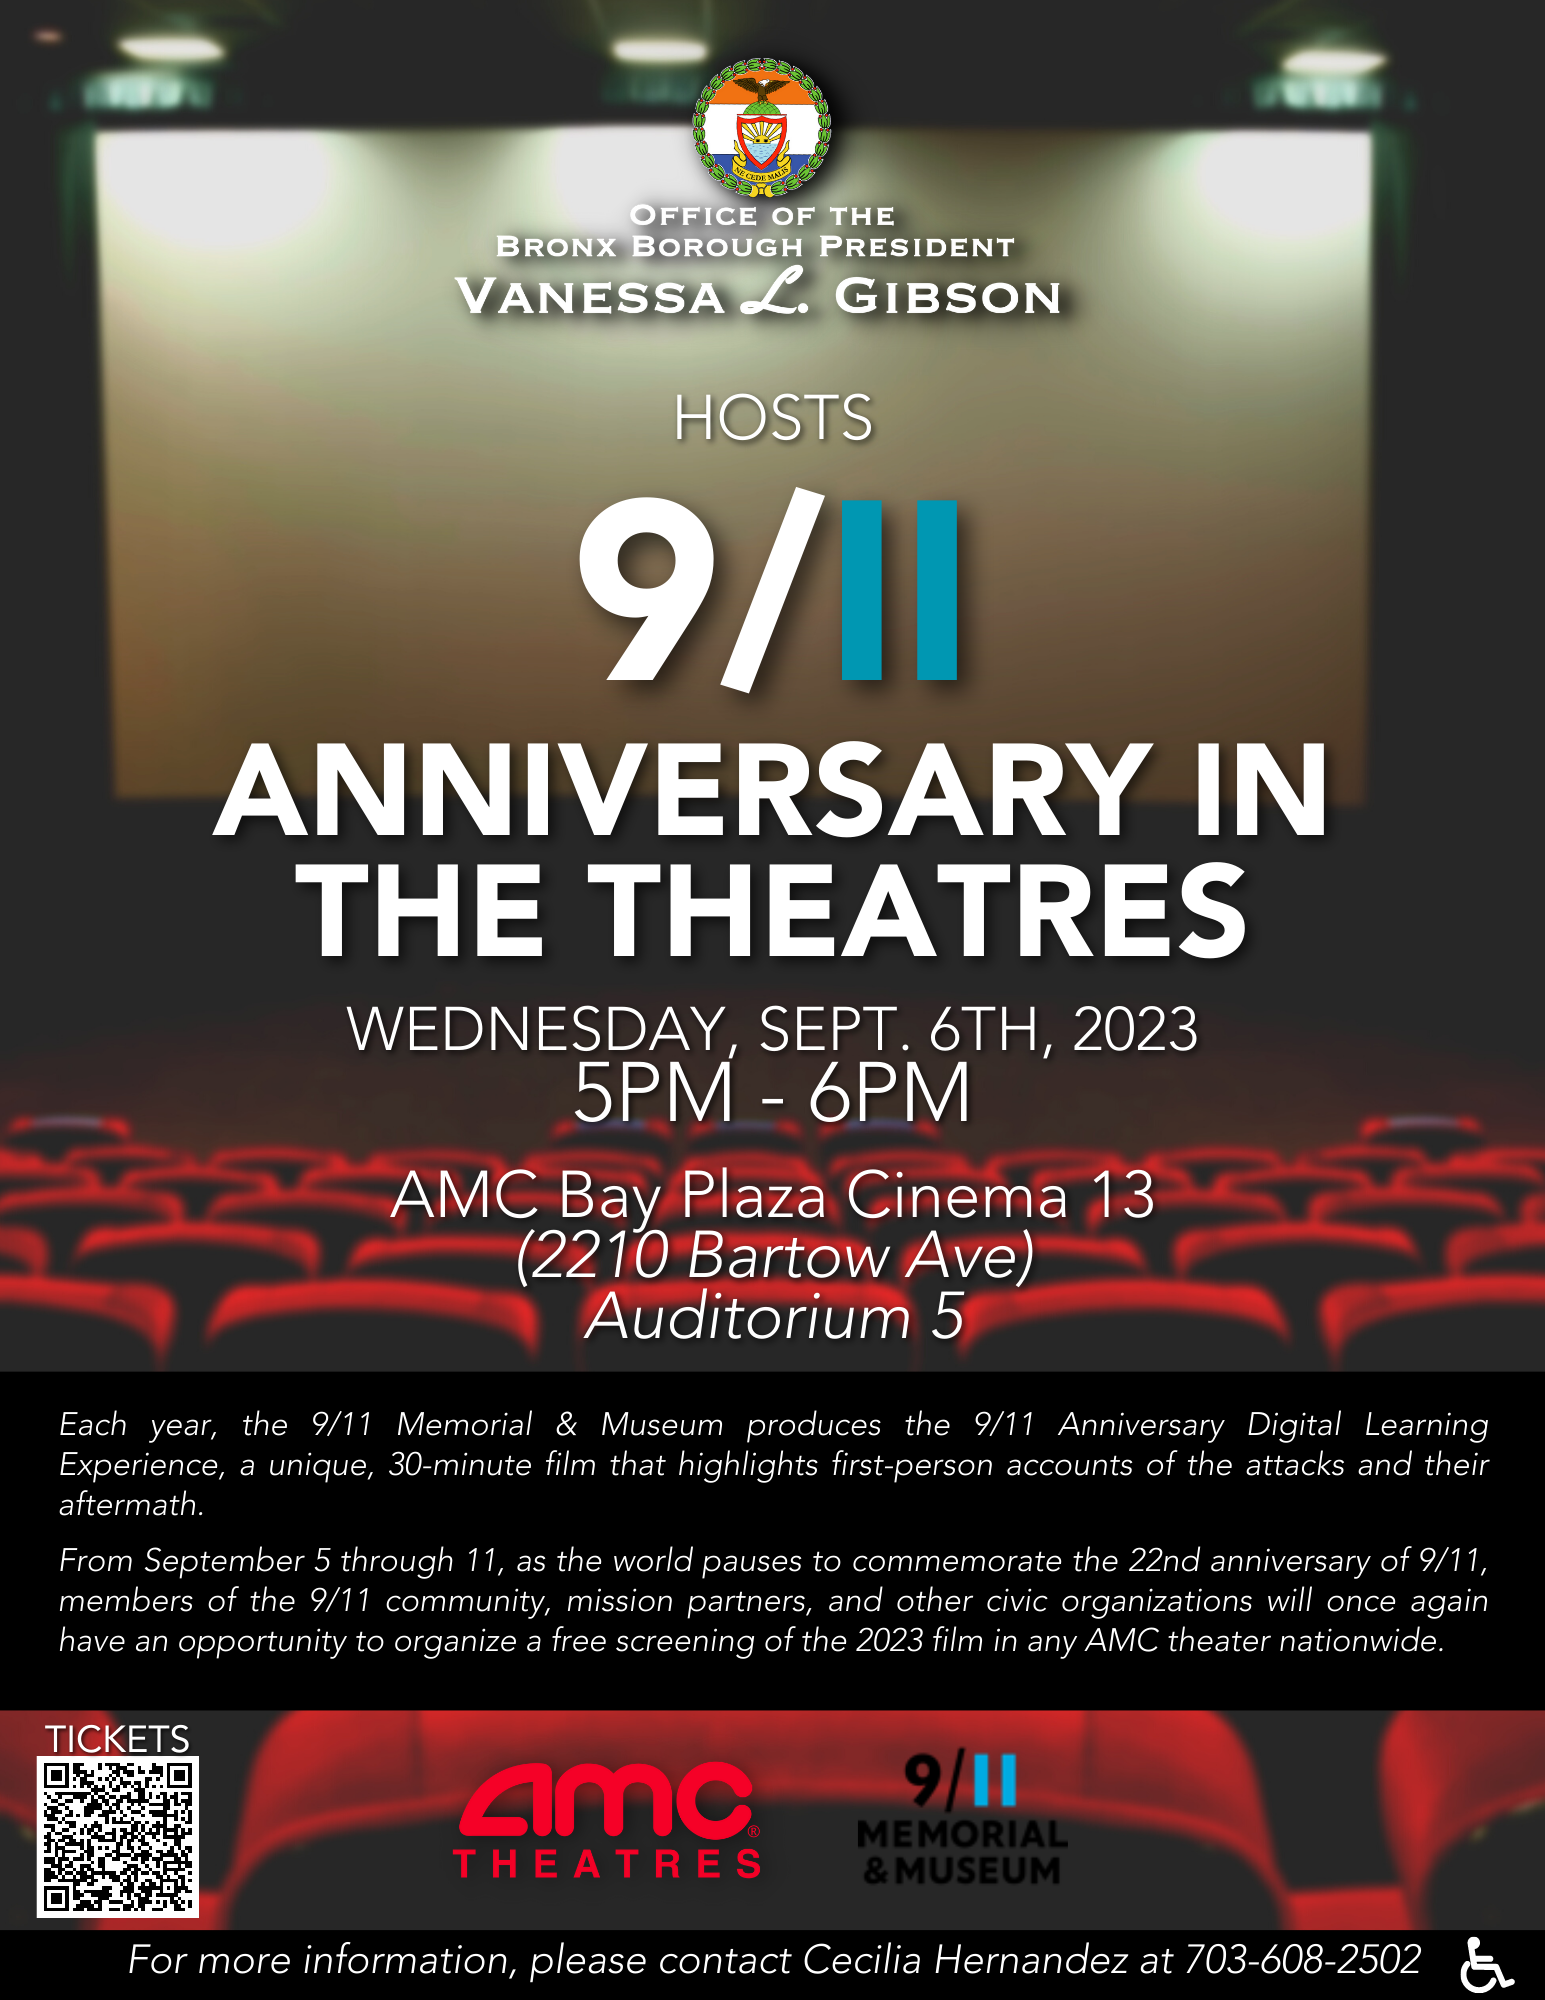 A flyer for a 9/11 Anniversary in the Theatres event on September 6 from 5 PM to 6 PM.